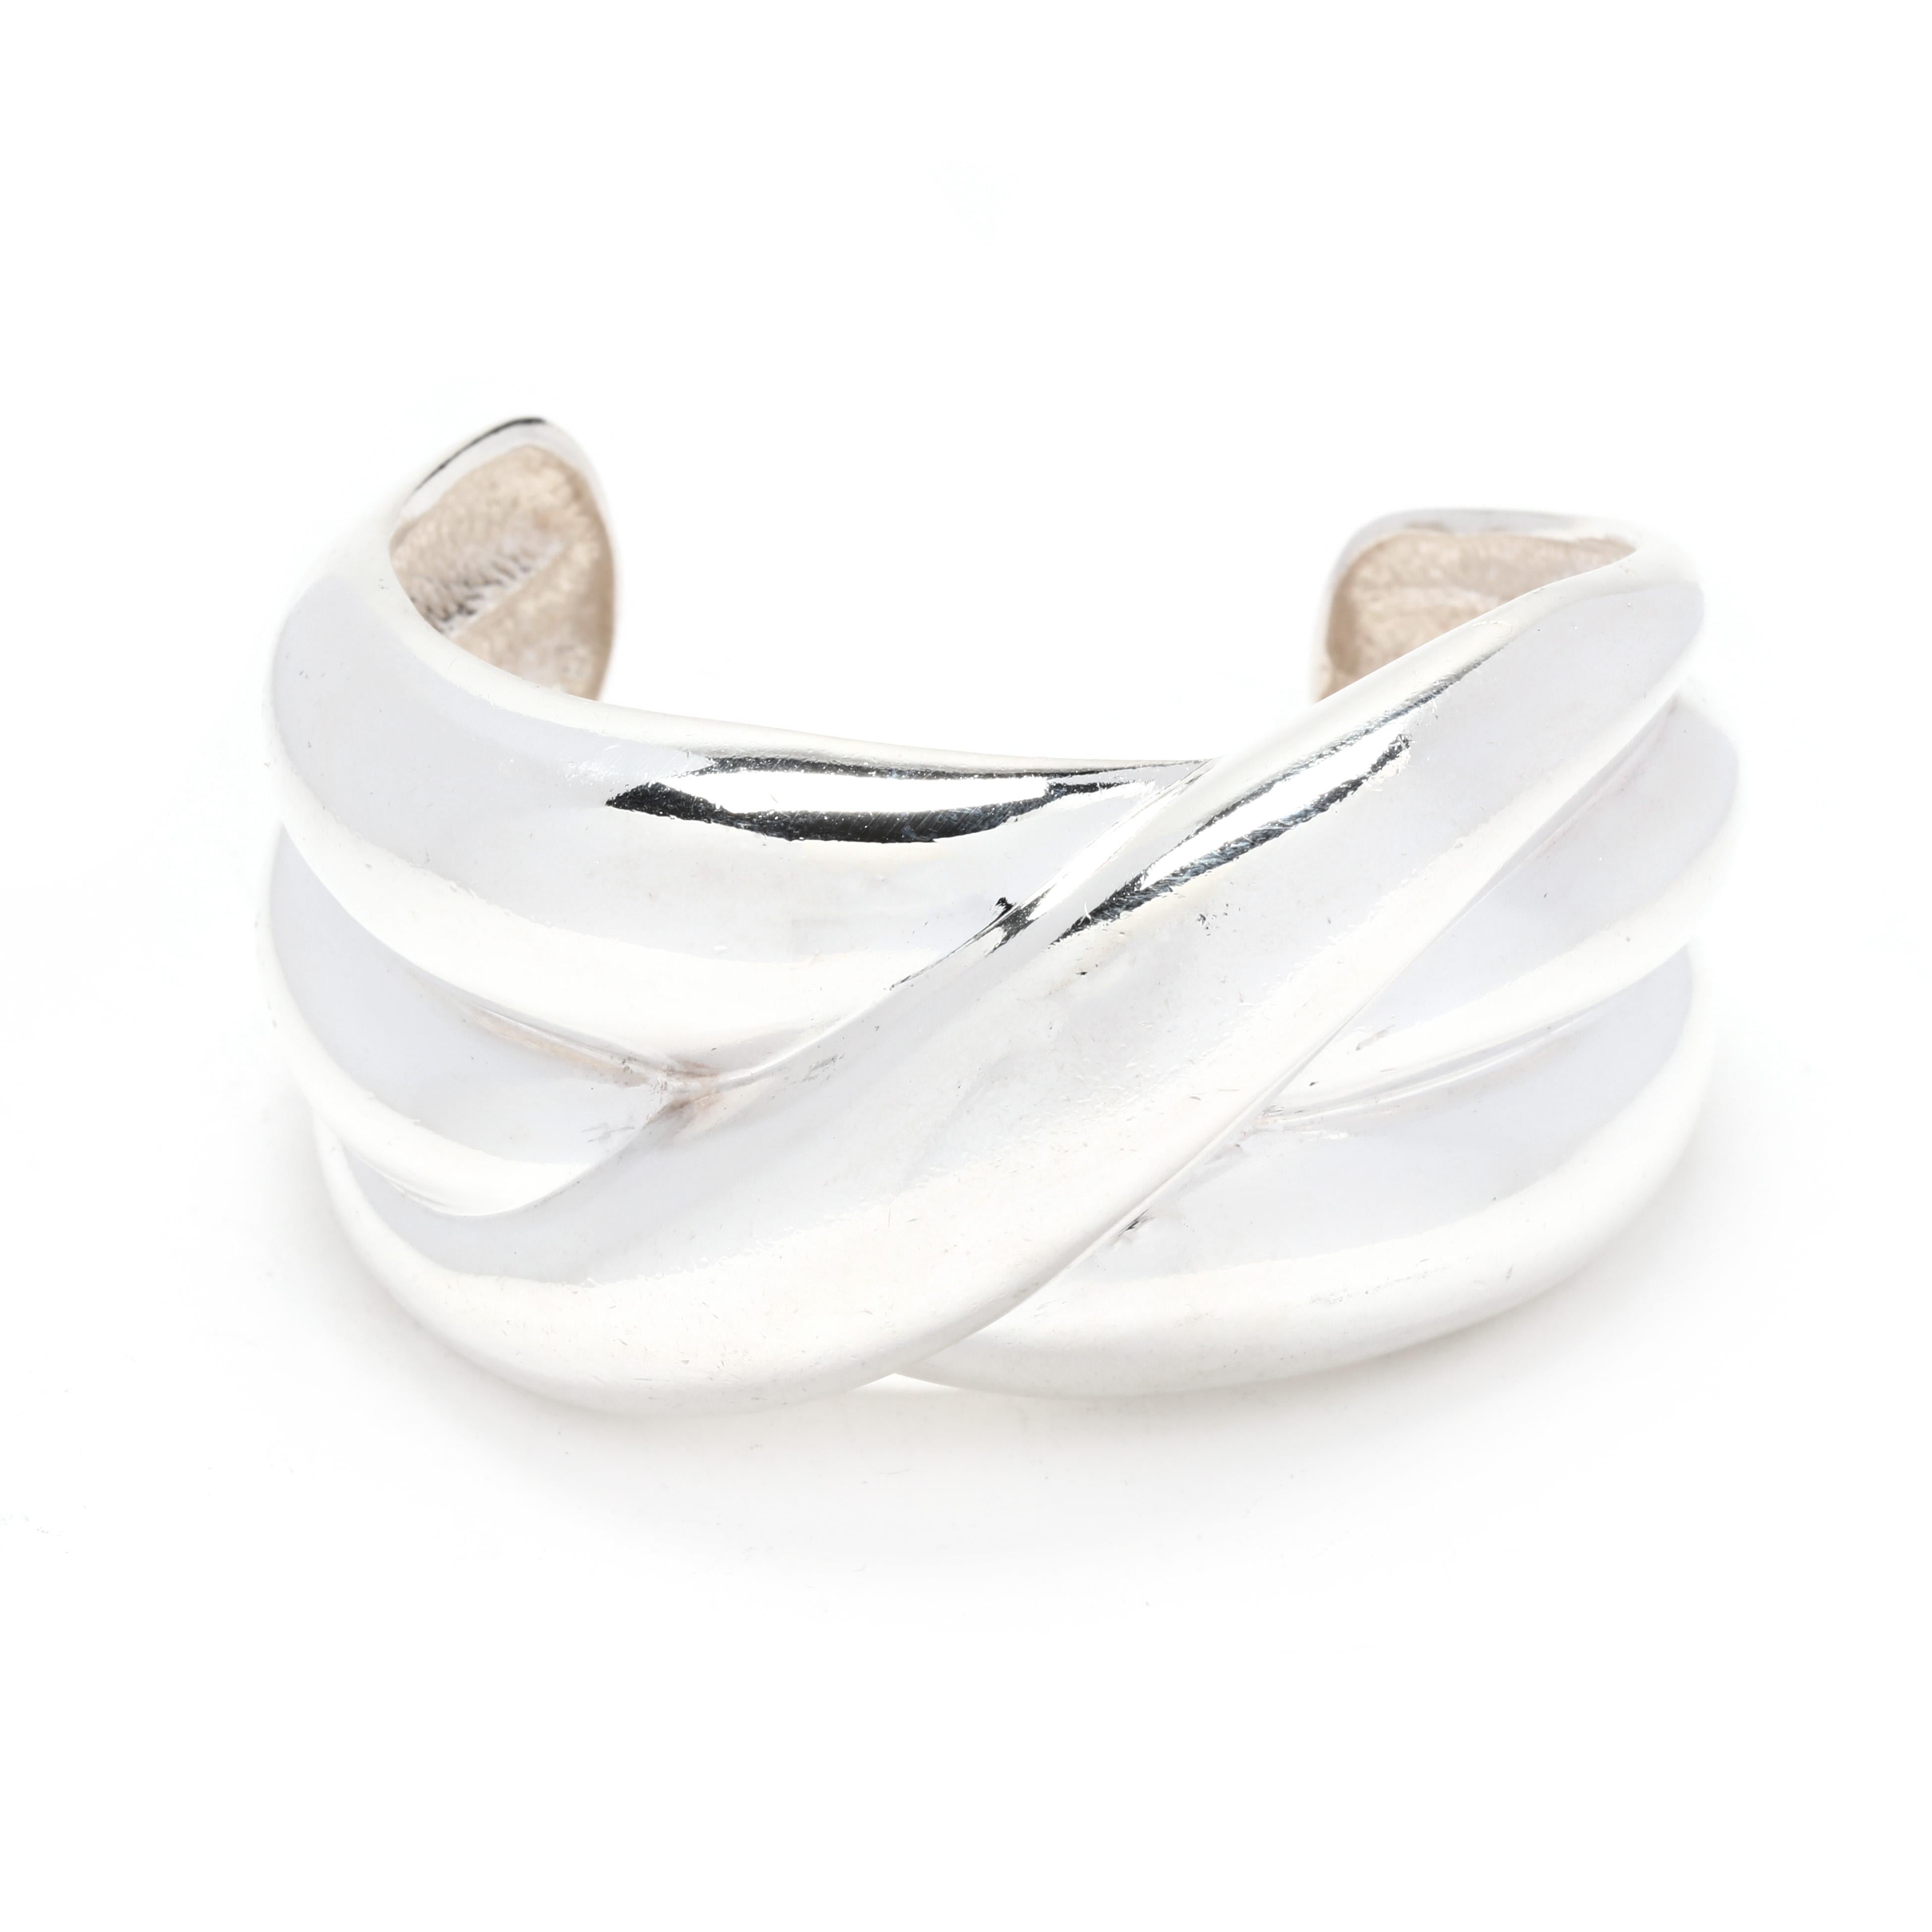 A vintage sterling silver bold crossover cuff bracelet design by Krypell. This bracelet features a design with three bands with central band crossing over.  It is stamped SS Krypell. 

Length: 6 inches with a 1.25 inch opening (slightly